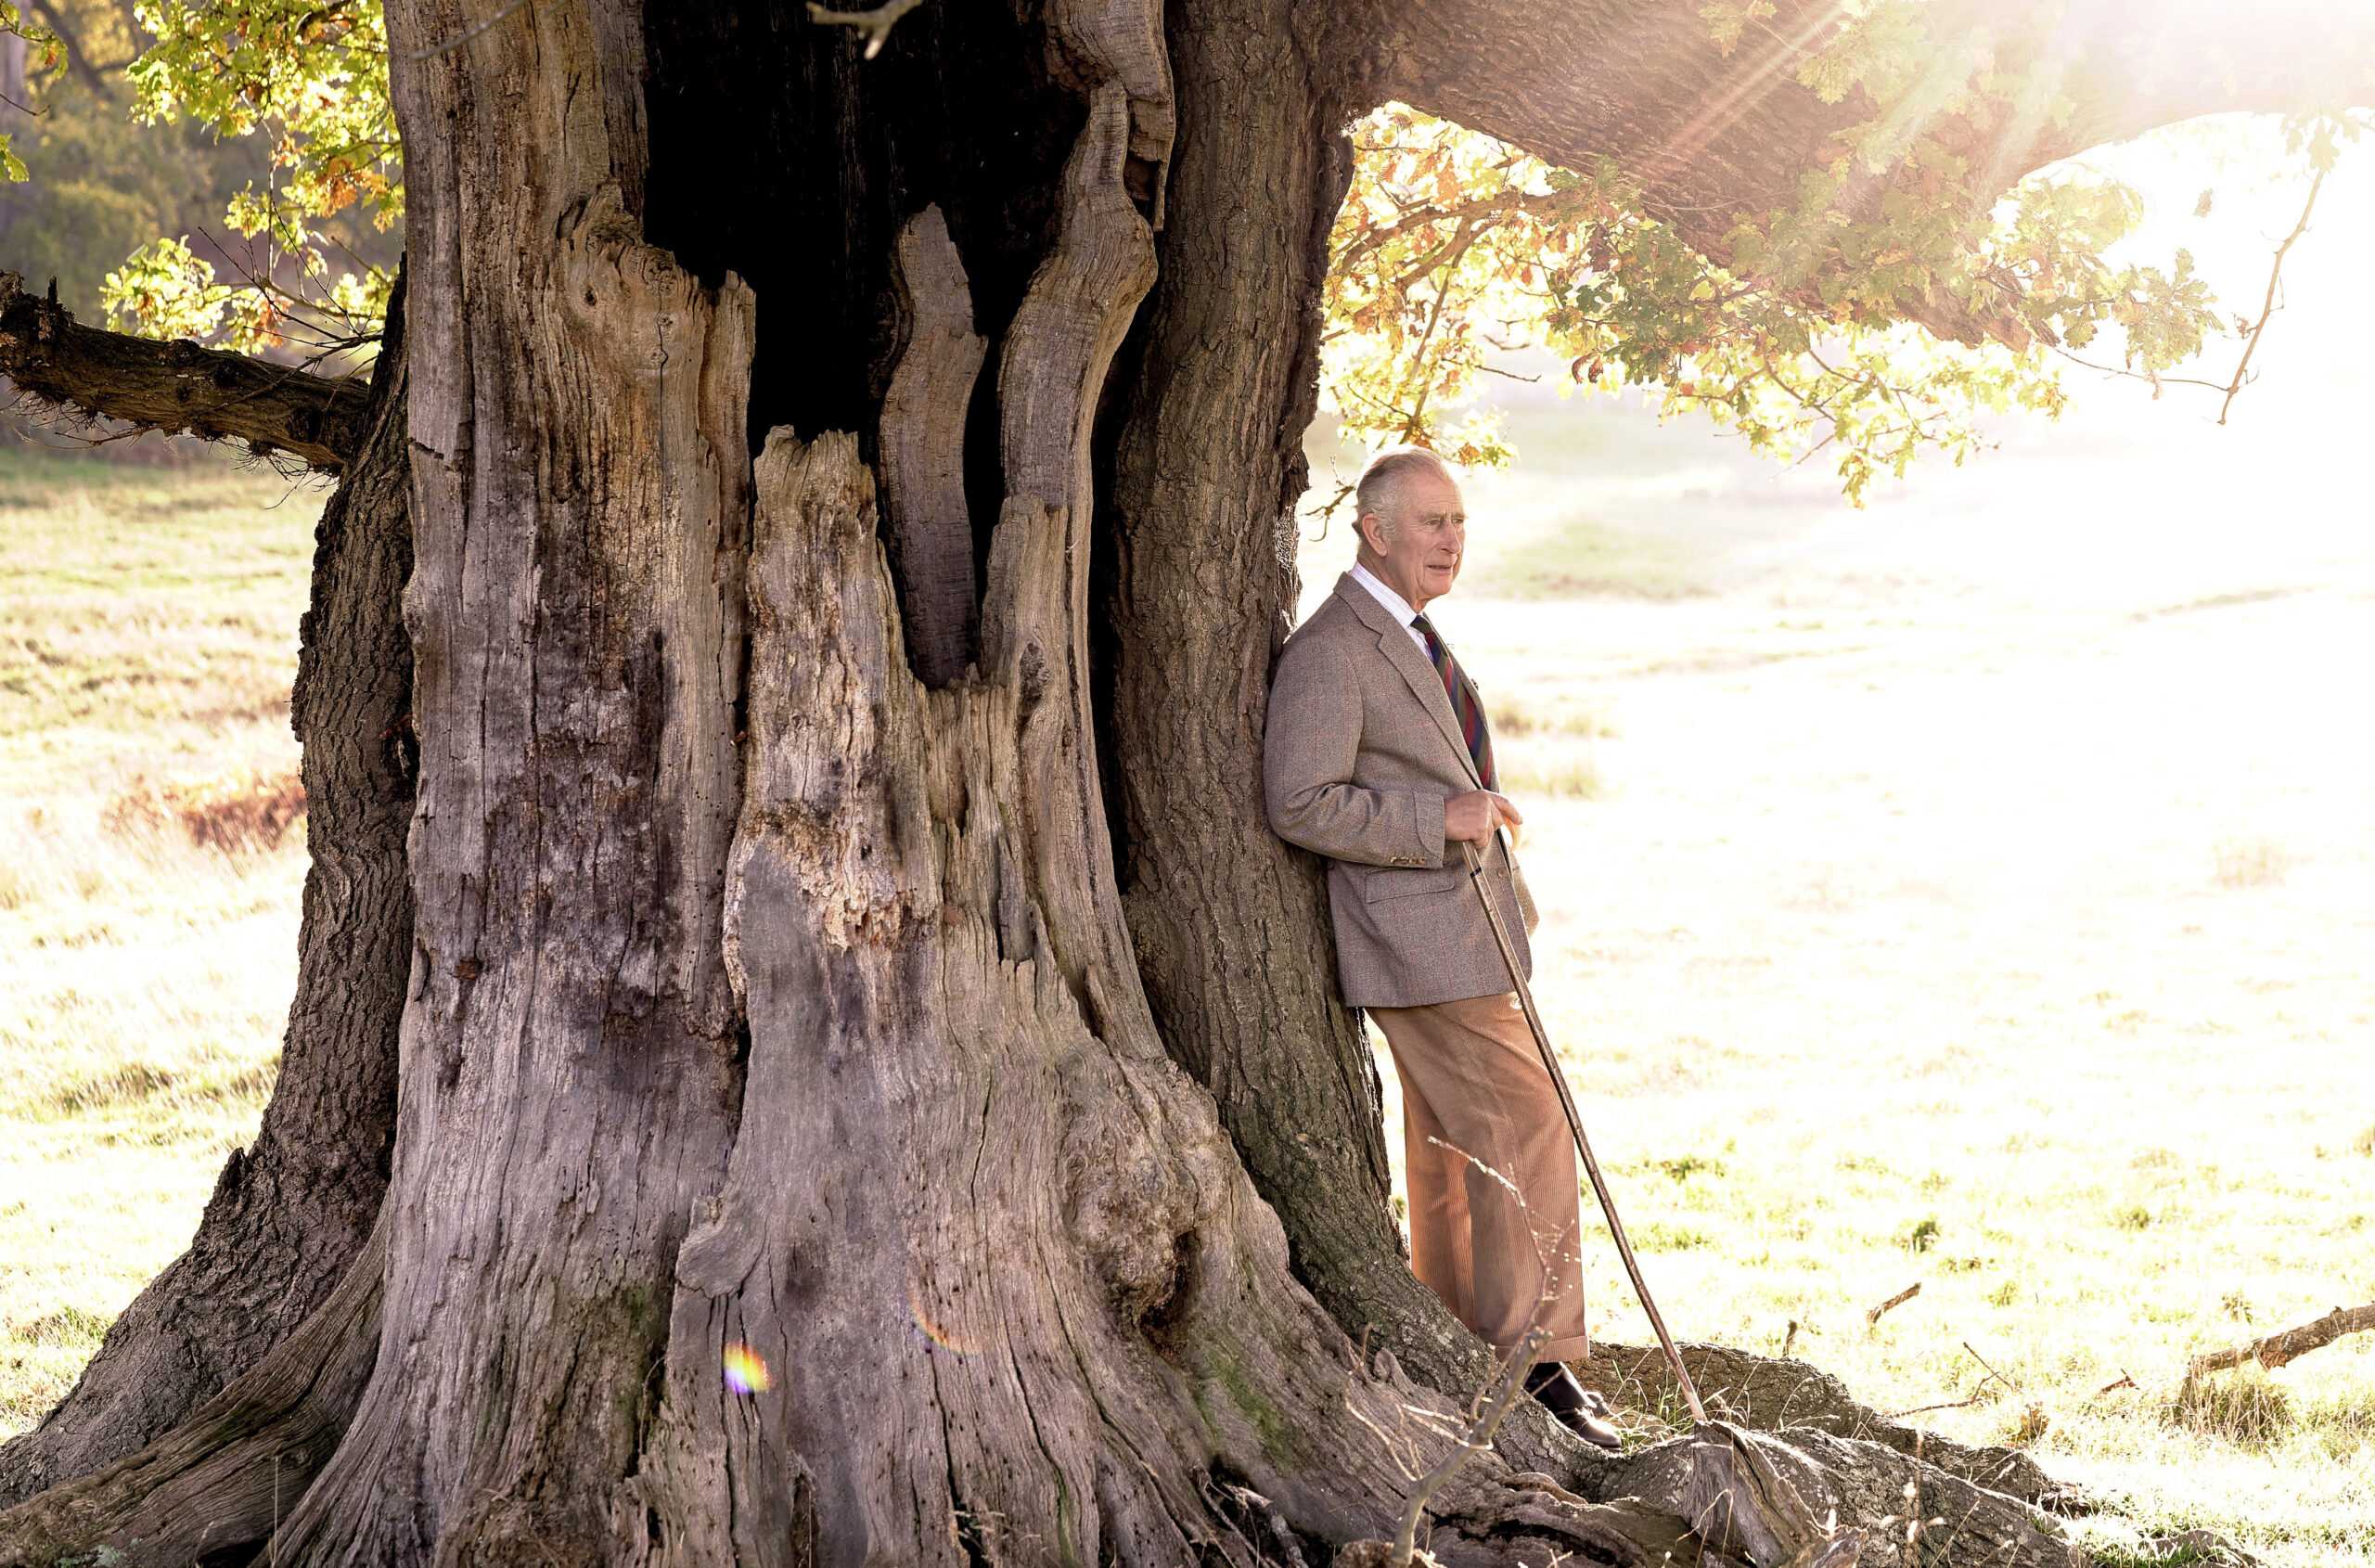 His Majesty King Charles III, Ranger of Windsor Great Park leaning against an oak tree in Windsor Great Park.